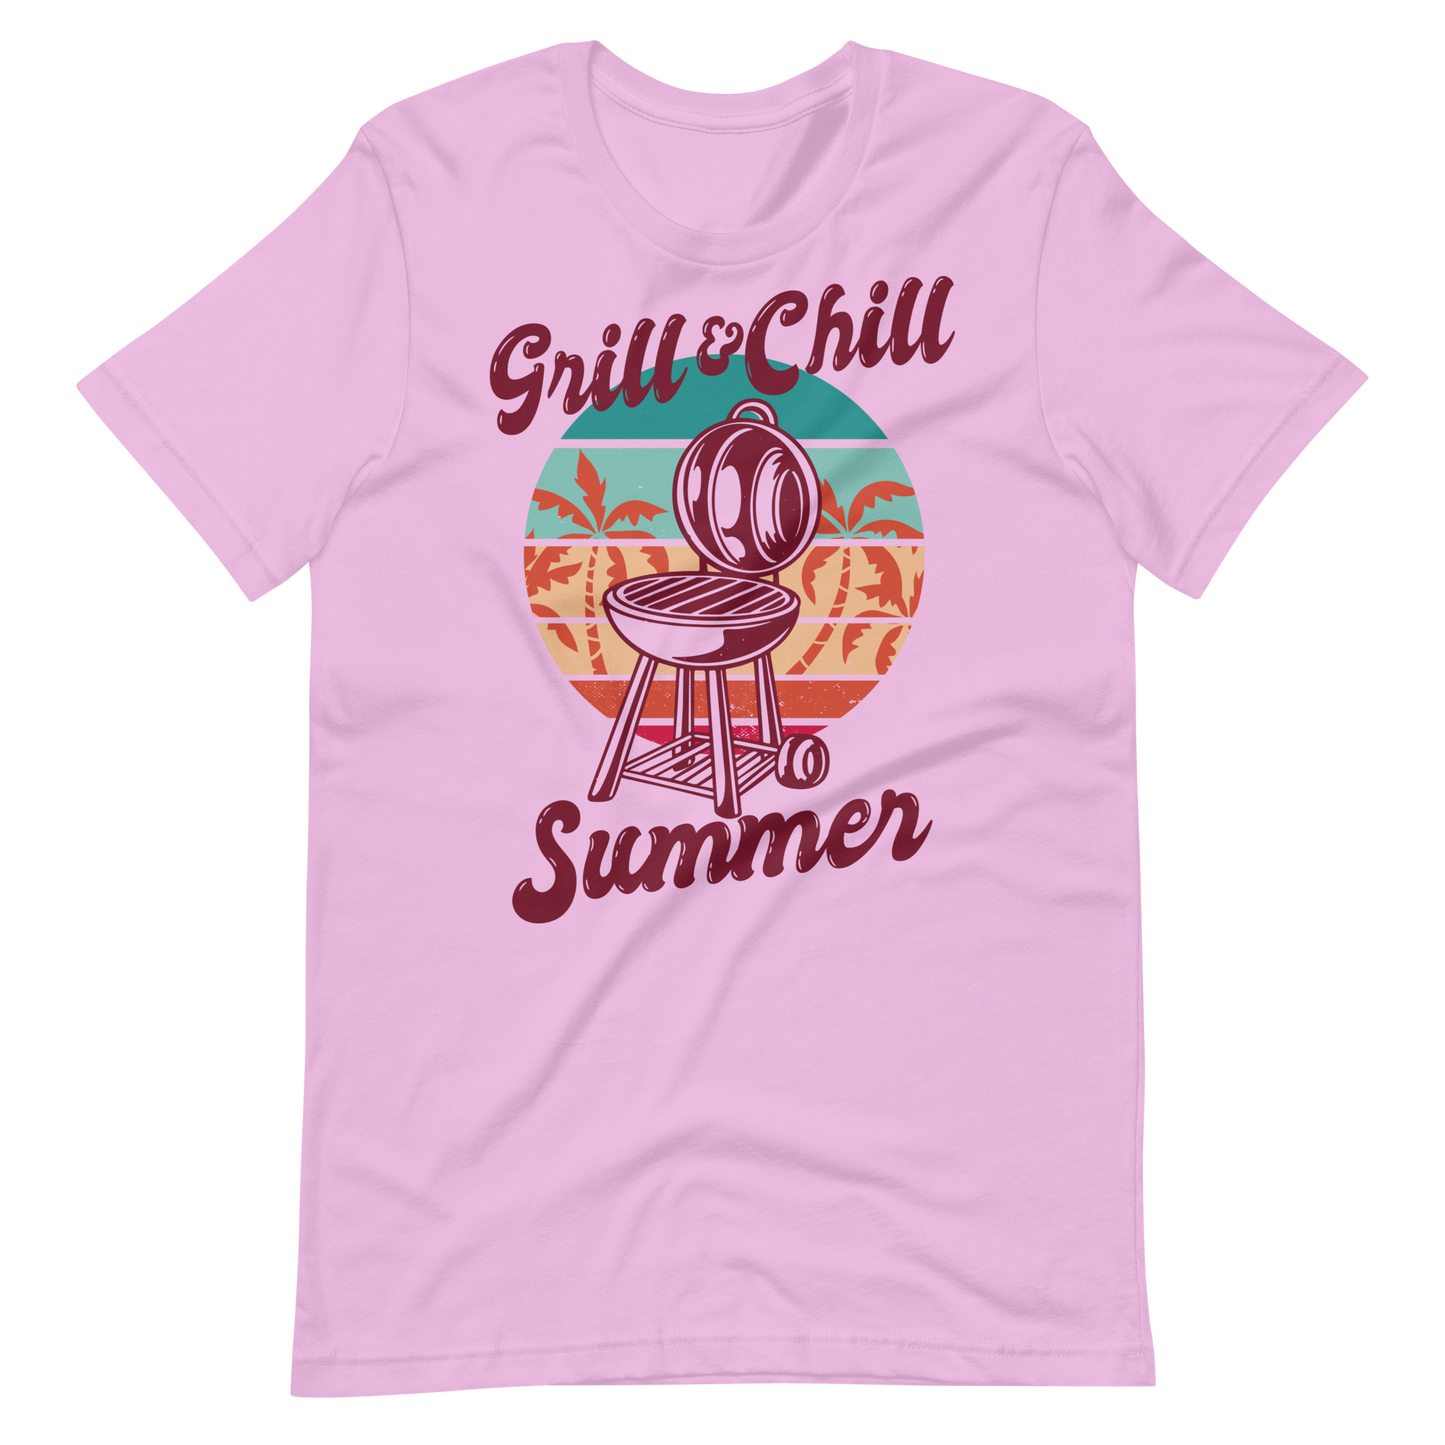 Chill and grill | Unisex t-shirt